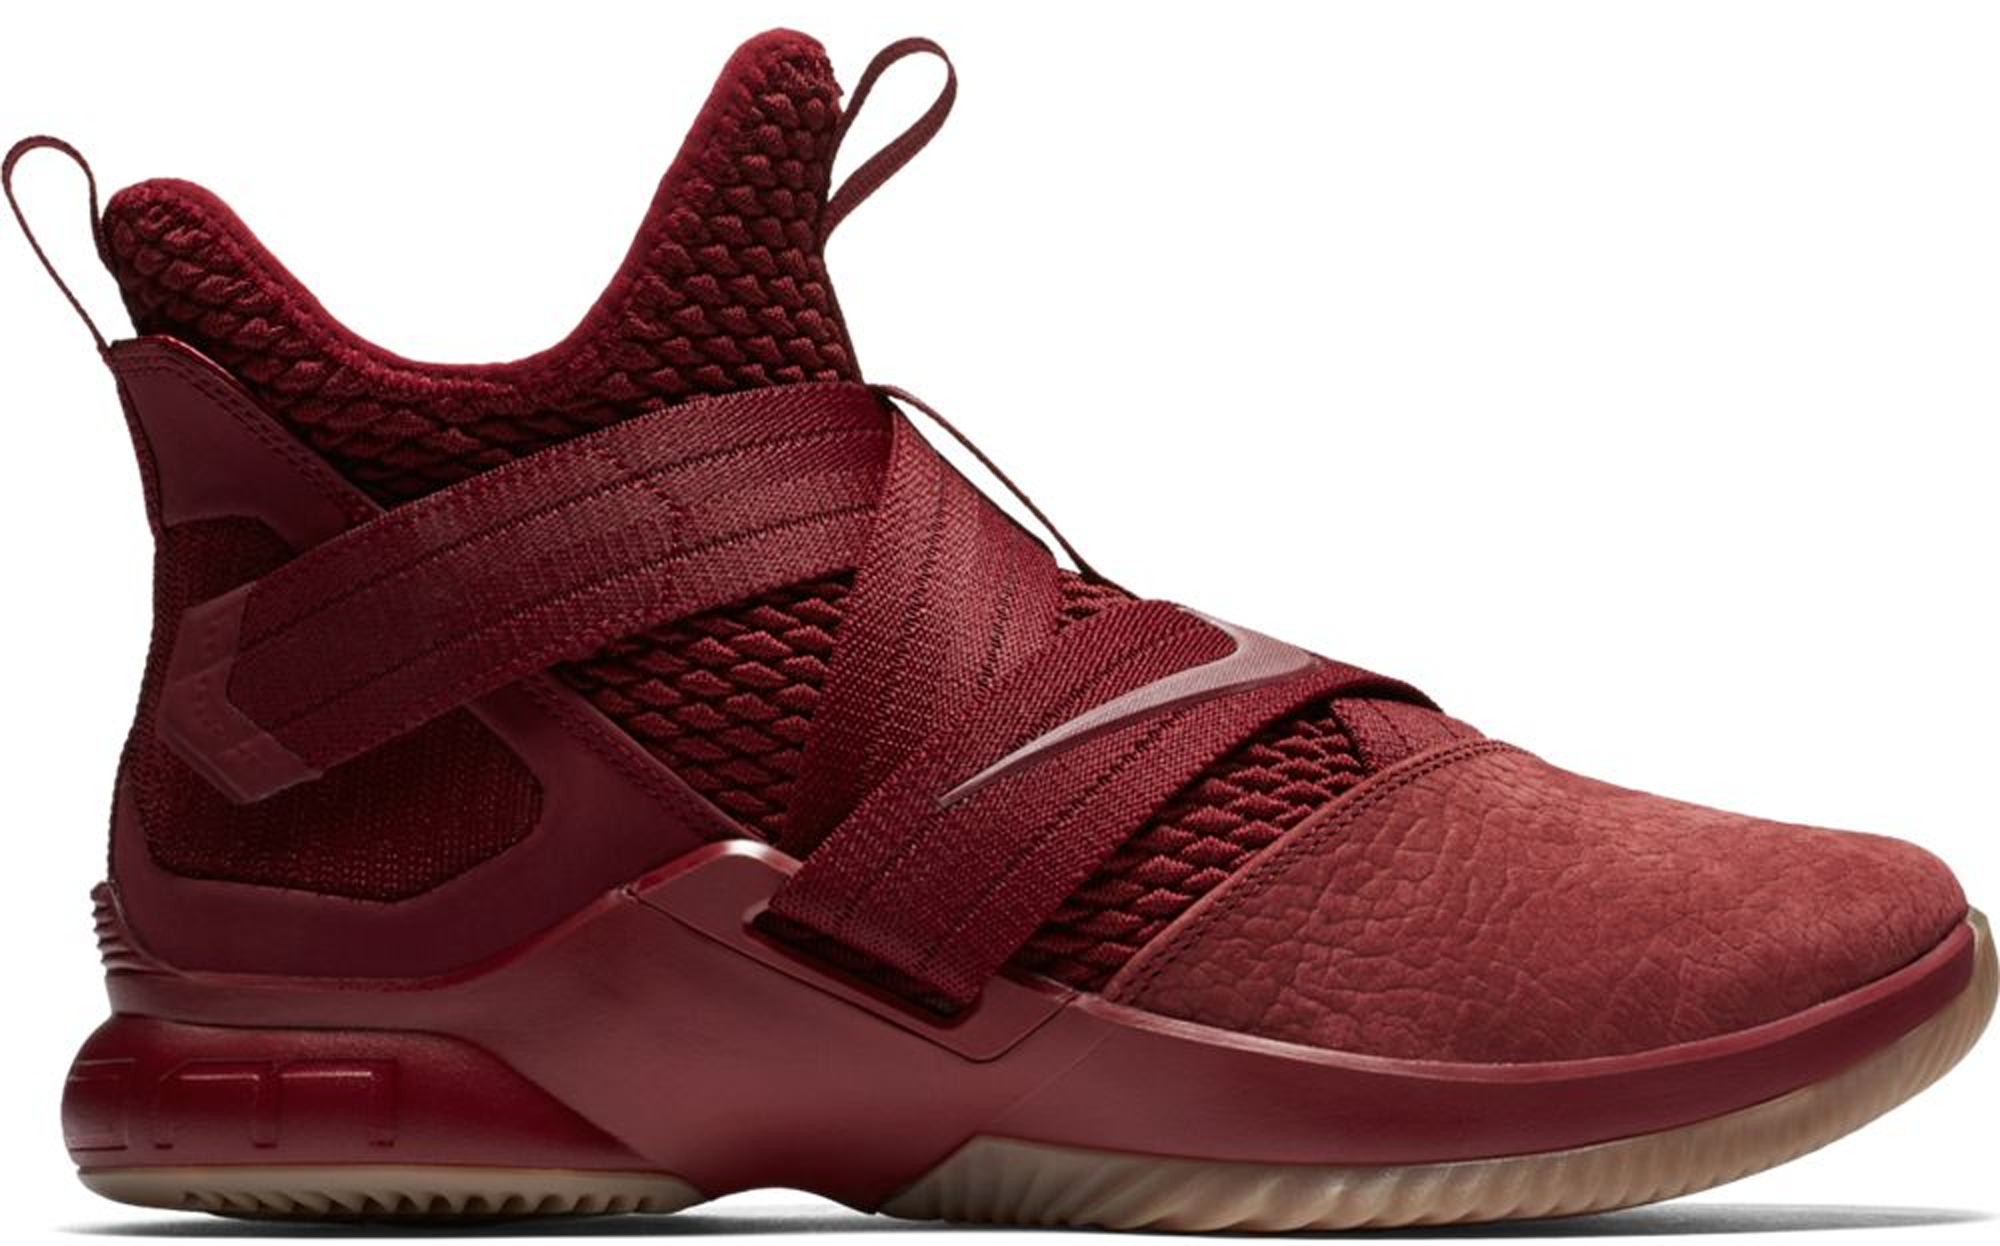 lebron soldier 12 university red